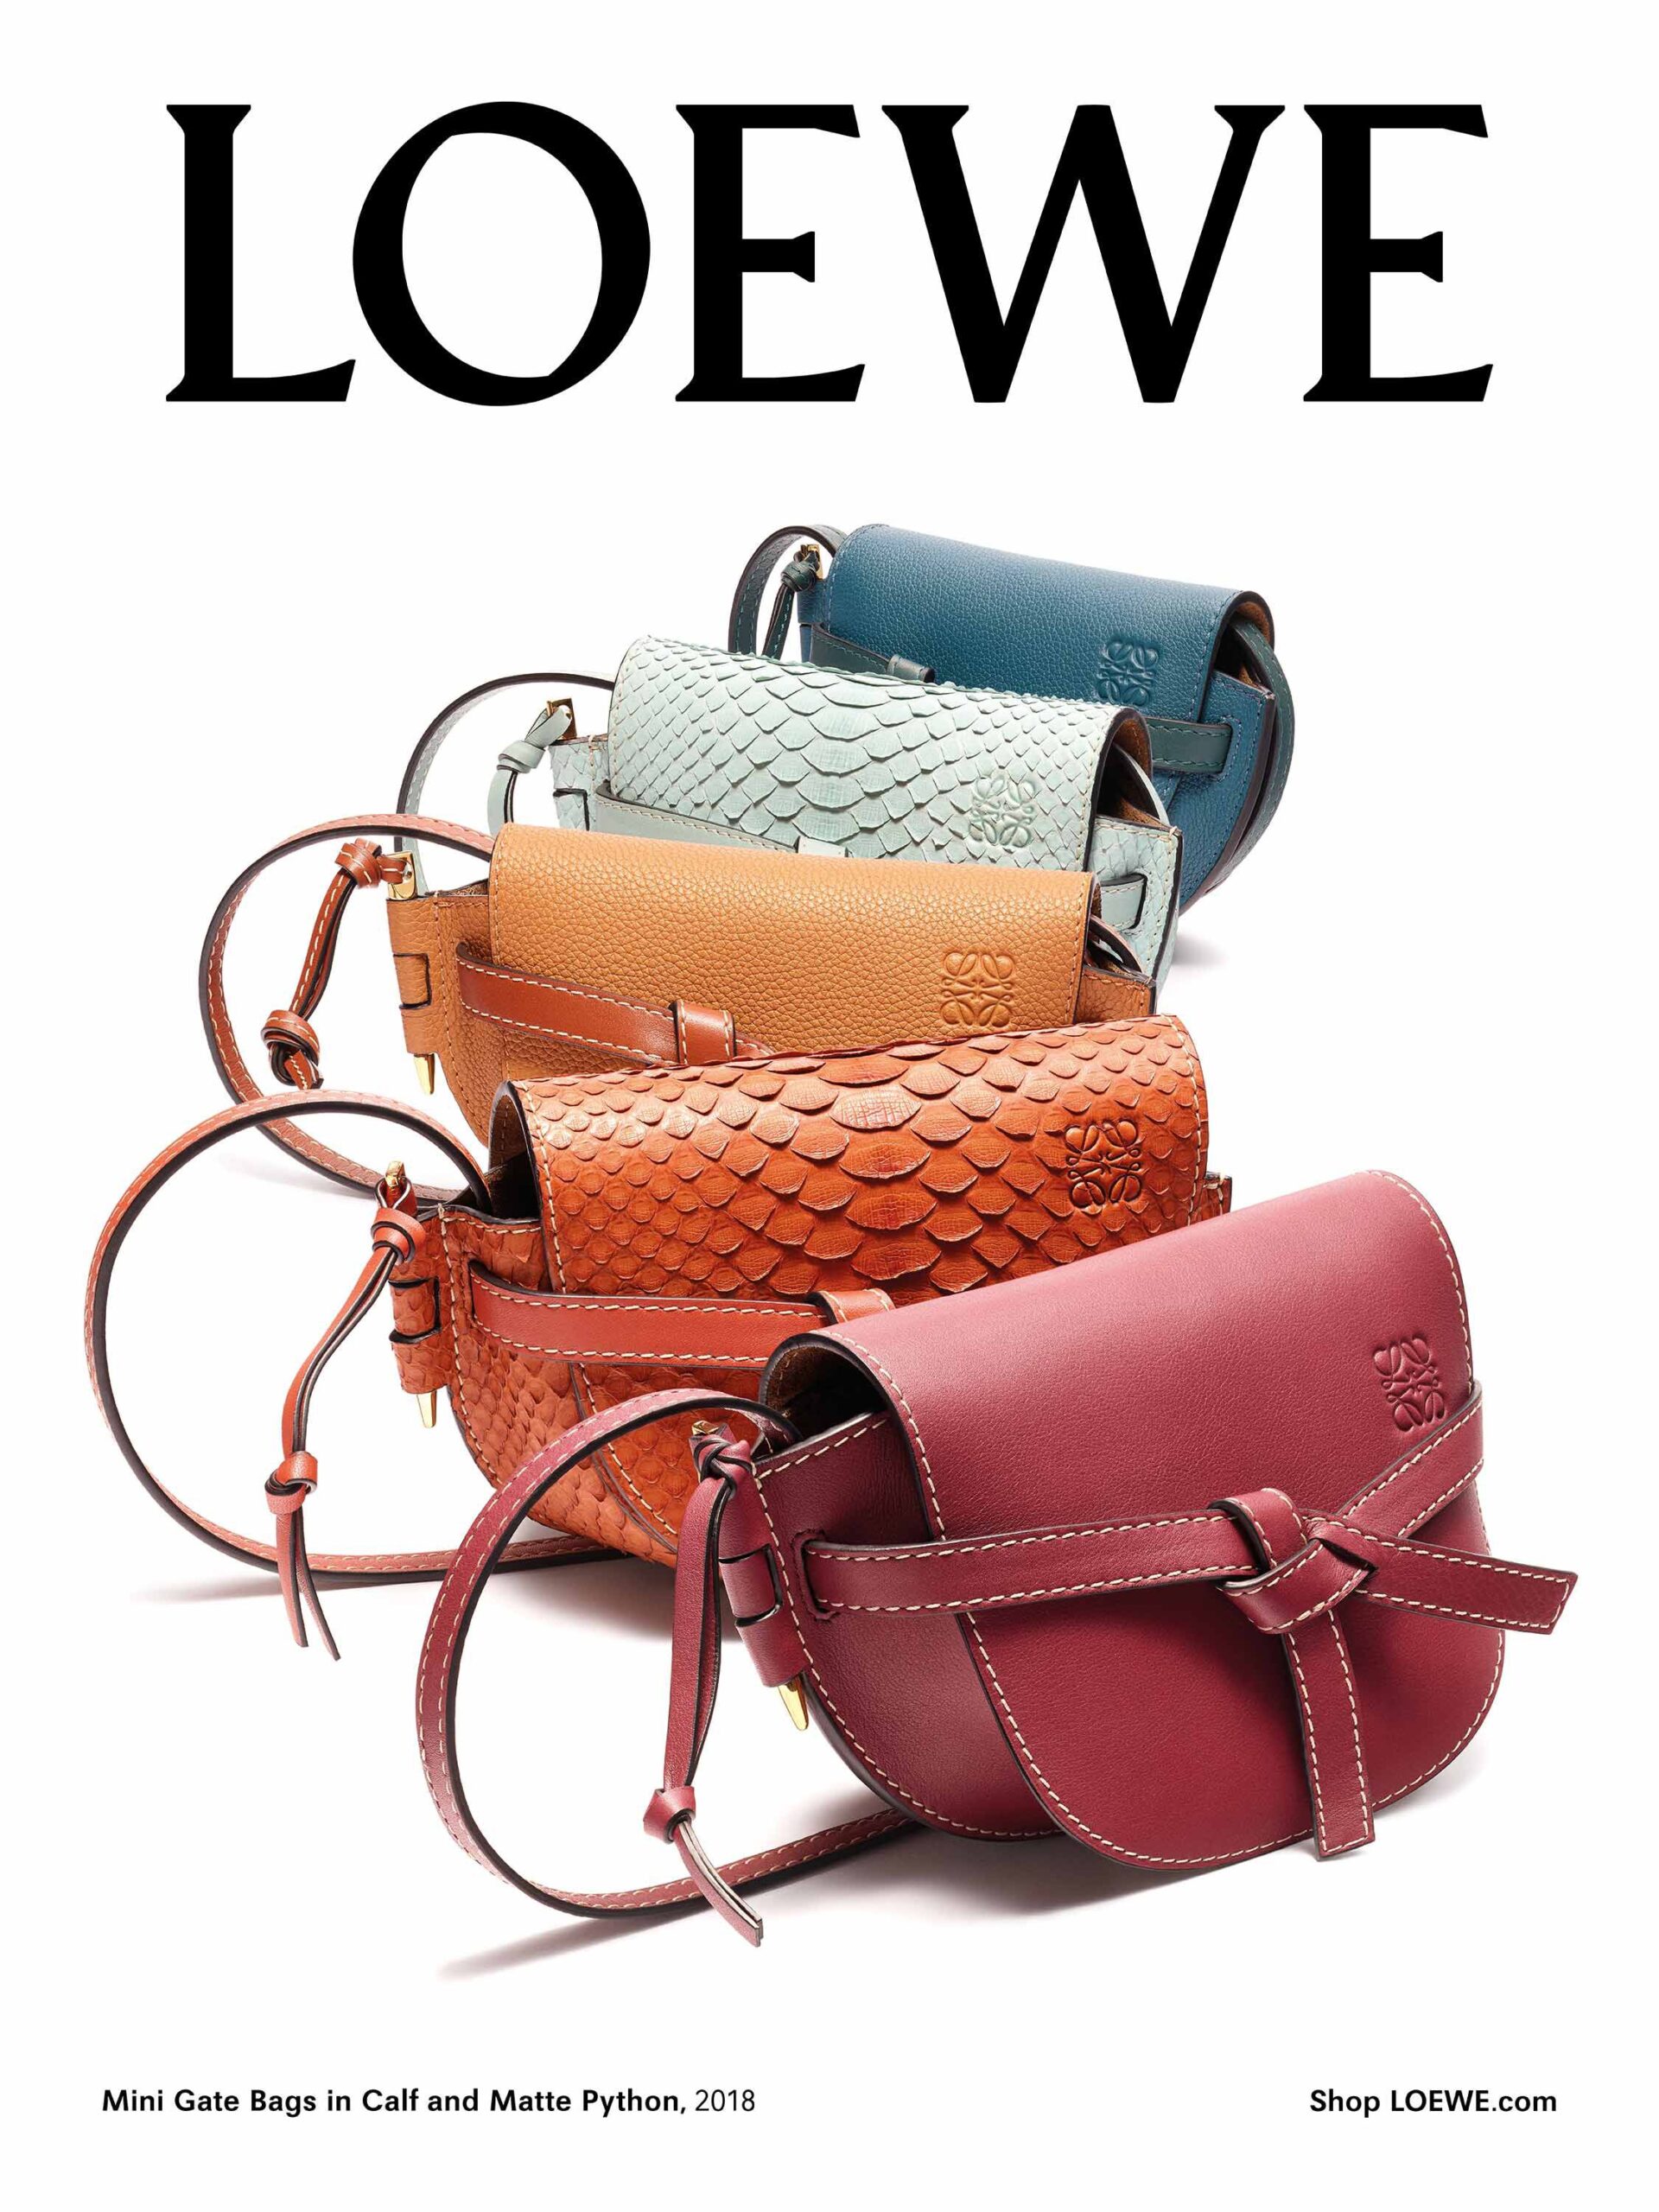 Jonathan Anderson breathes fresh air into the Spanish heritage brand Loewe